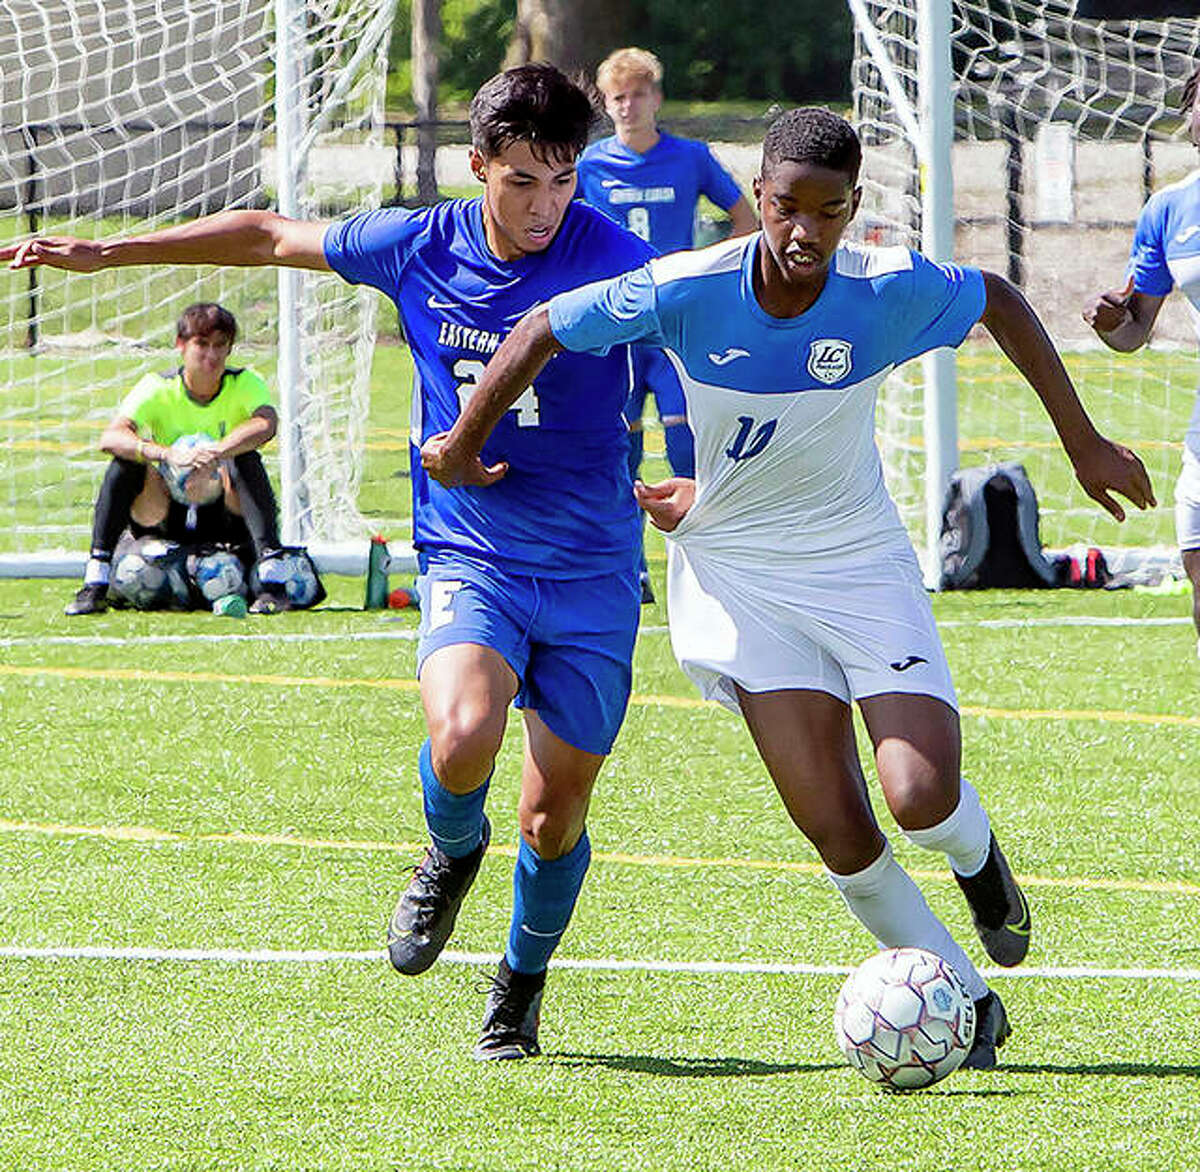 Tyriq Gordon of Lewis and Clark (11) scored a goal in Wednesday’s 5-1 victory over Lincoln Trail College in Robinson. He is shown in action Sept. 5 against Southwestern Florida State College.